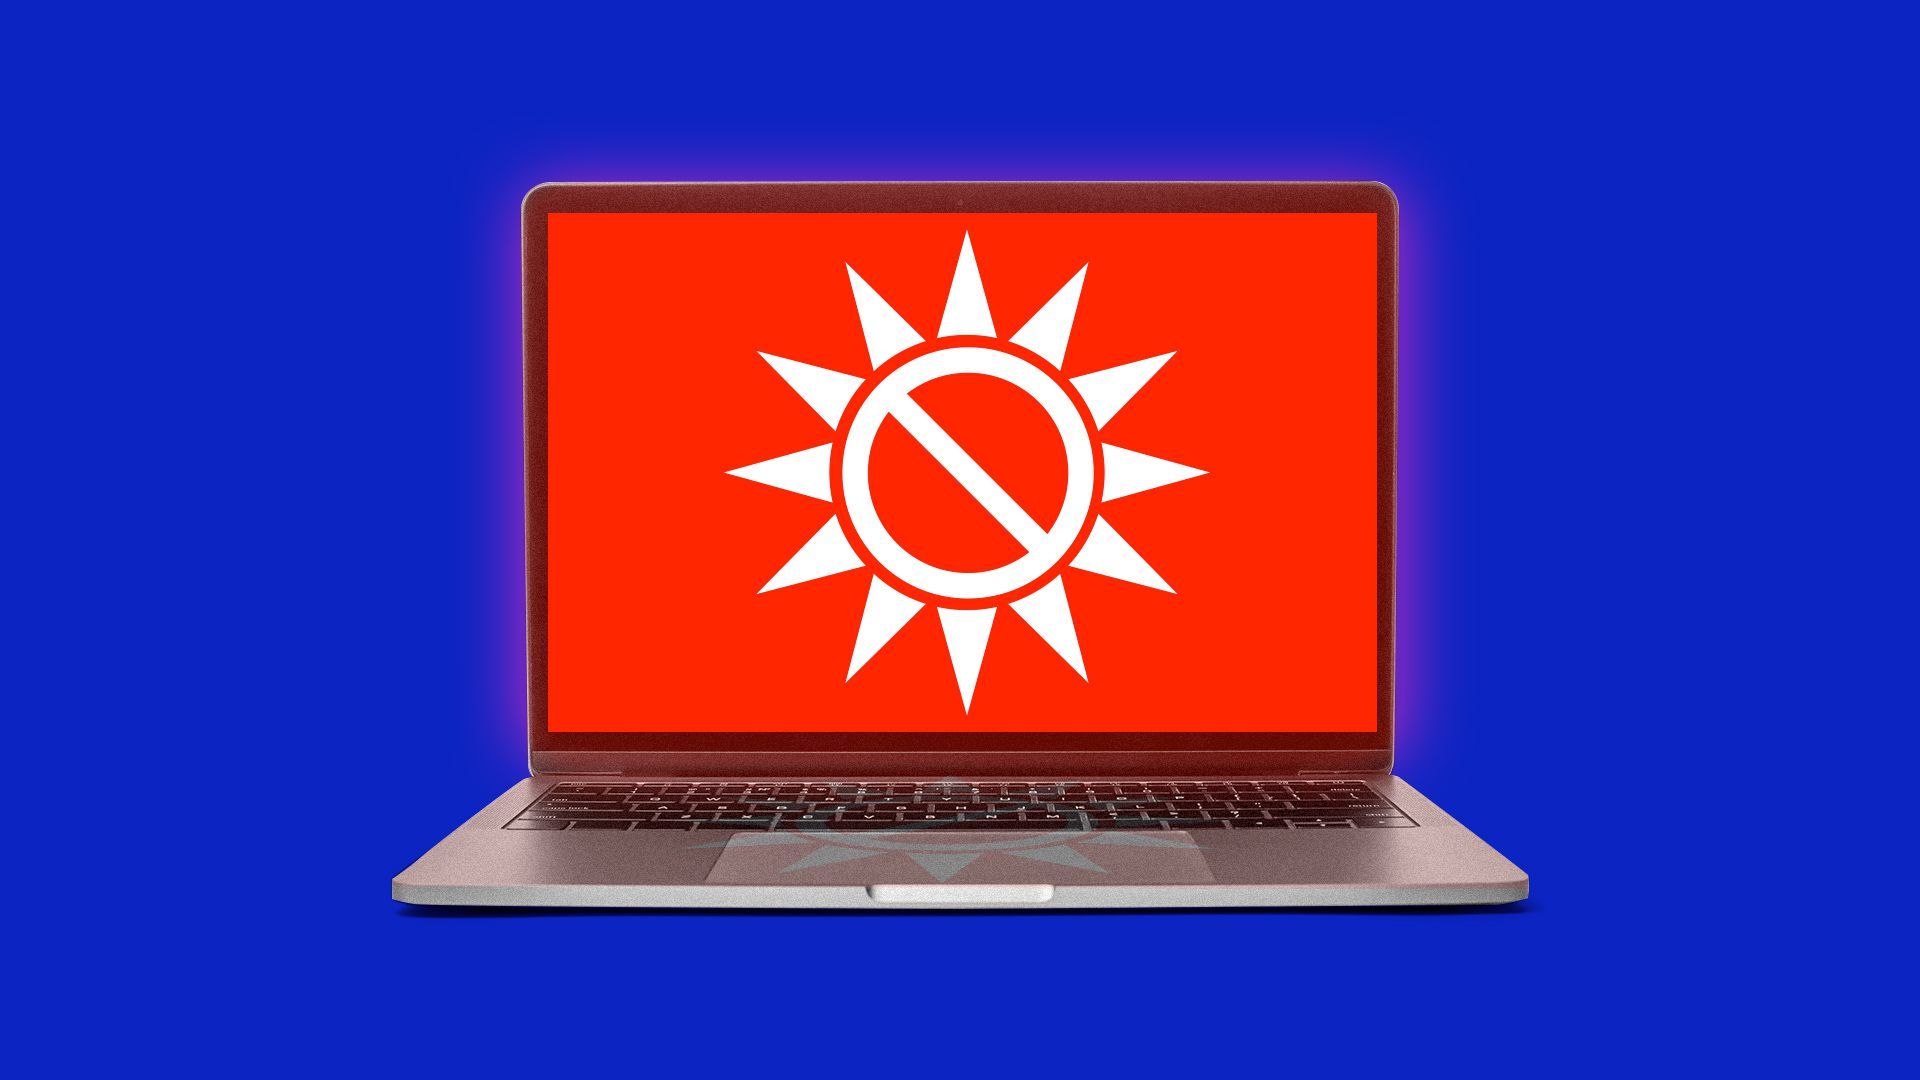 Illustration of a laptop showing the white sun of the Taiwanese flag as a no symbol. 